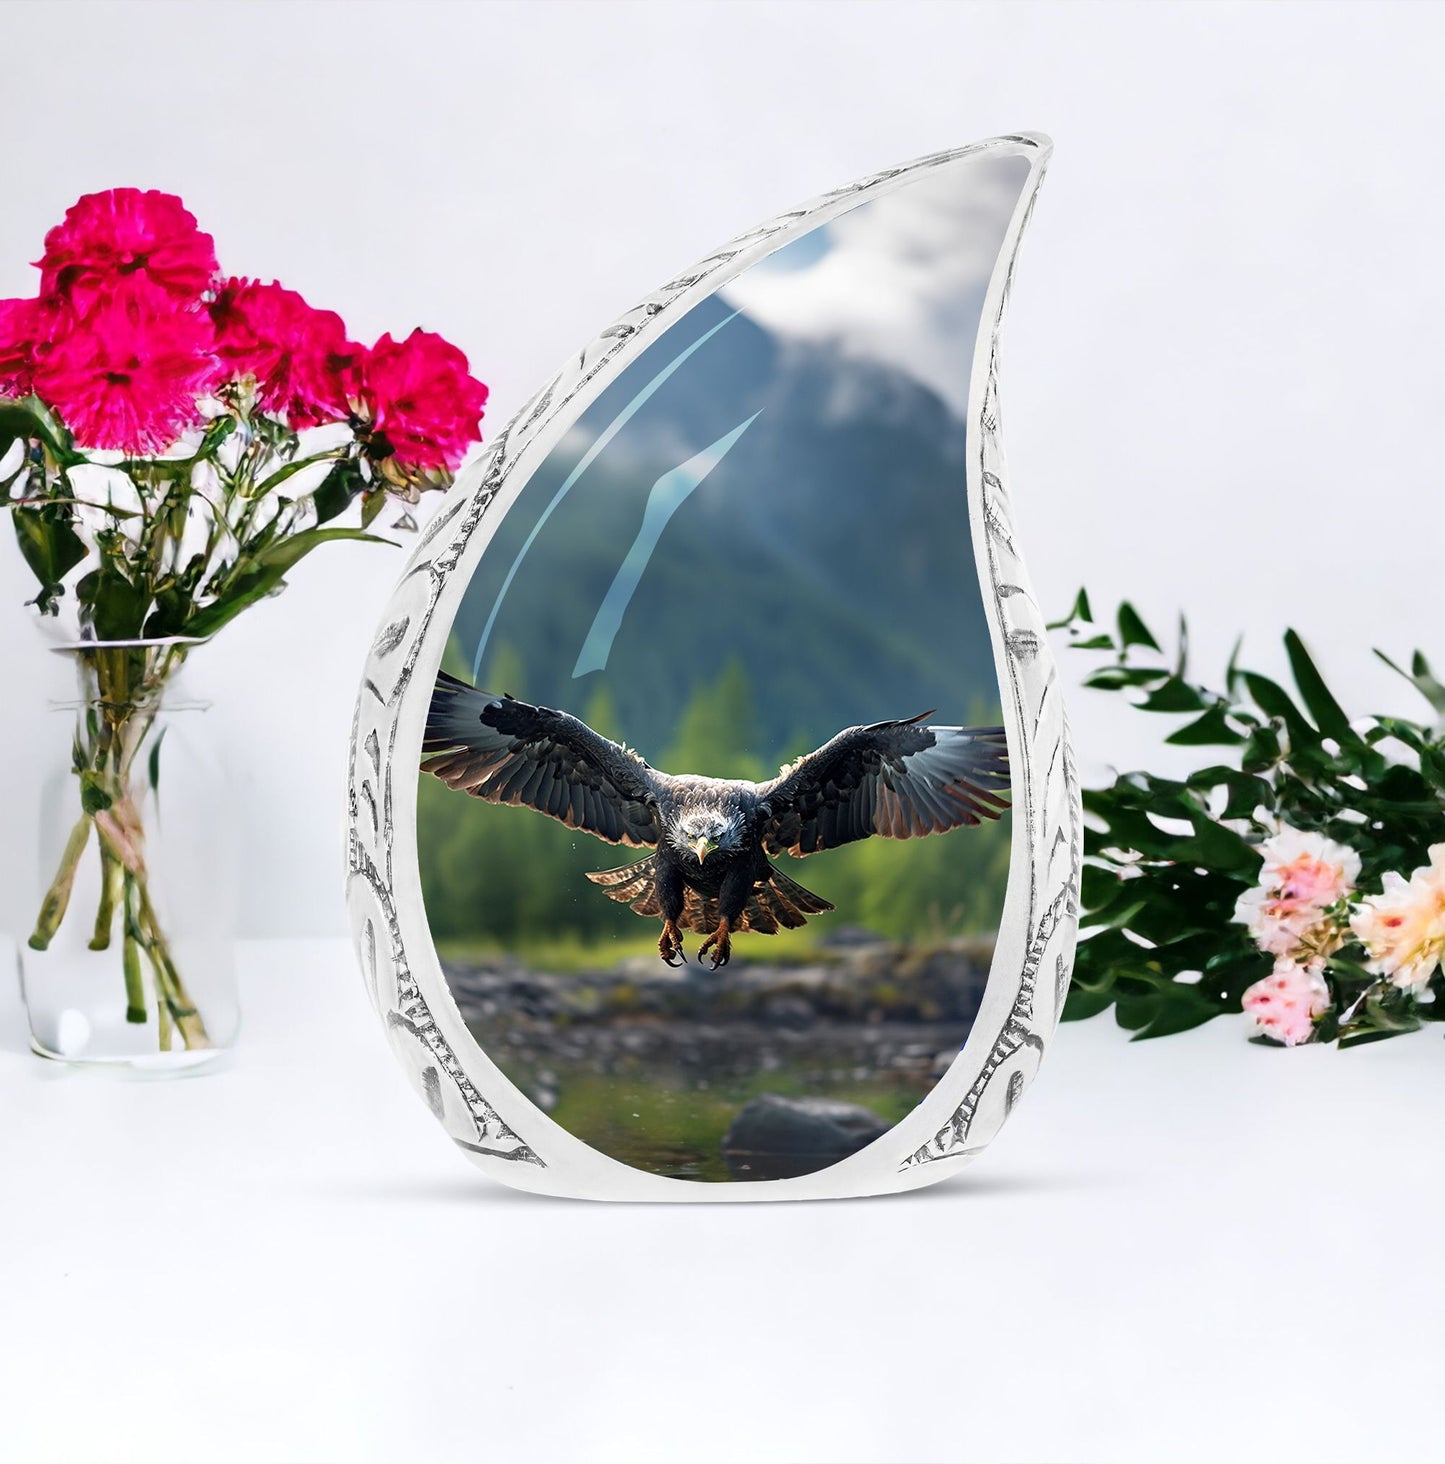 Large eagle urn for burial in ground, ideal for ashes of adult women, depicting eagle flying in a forest